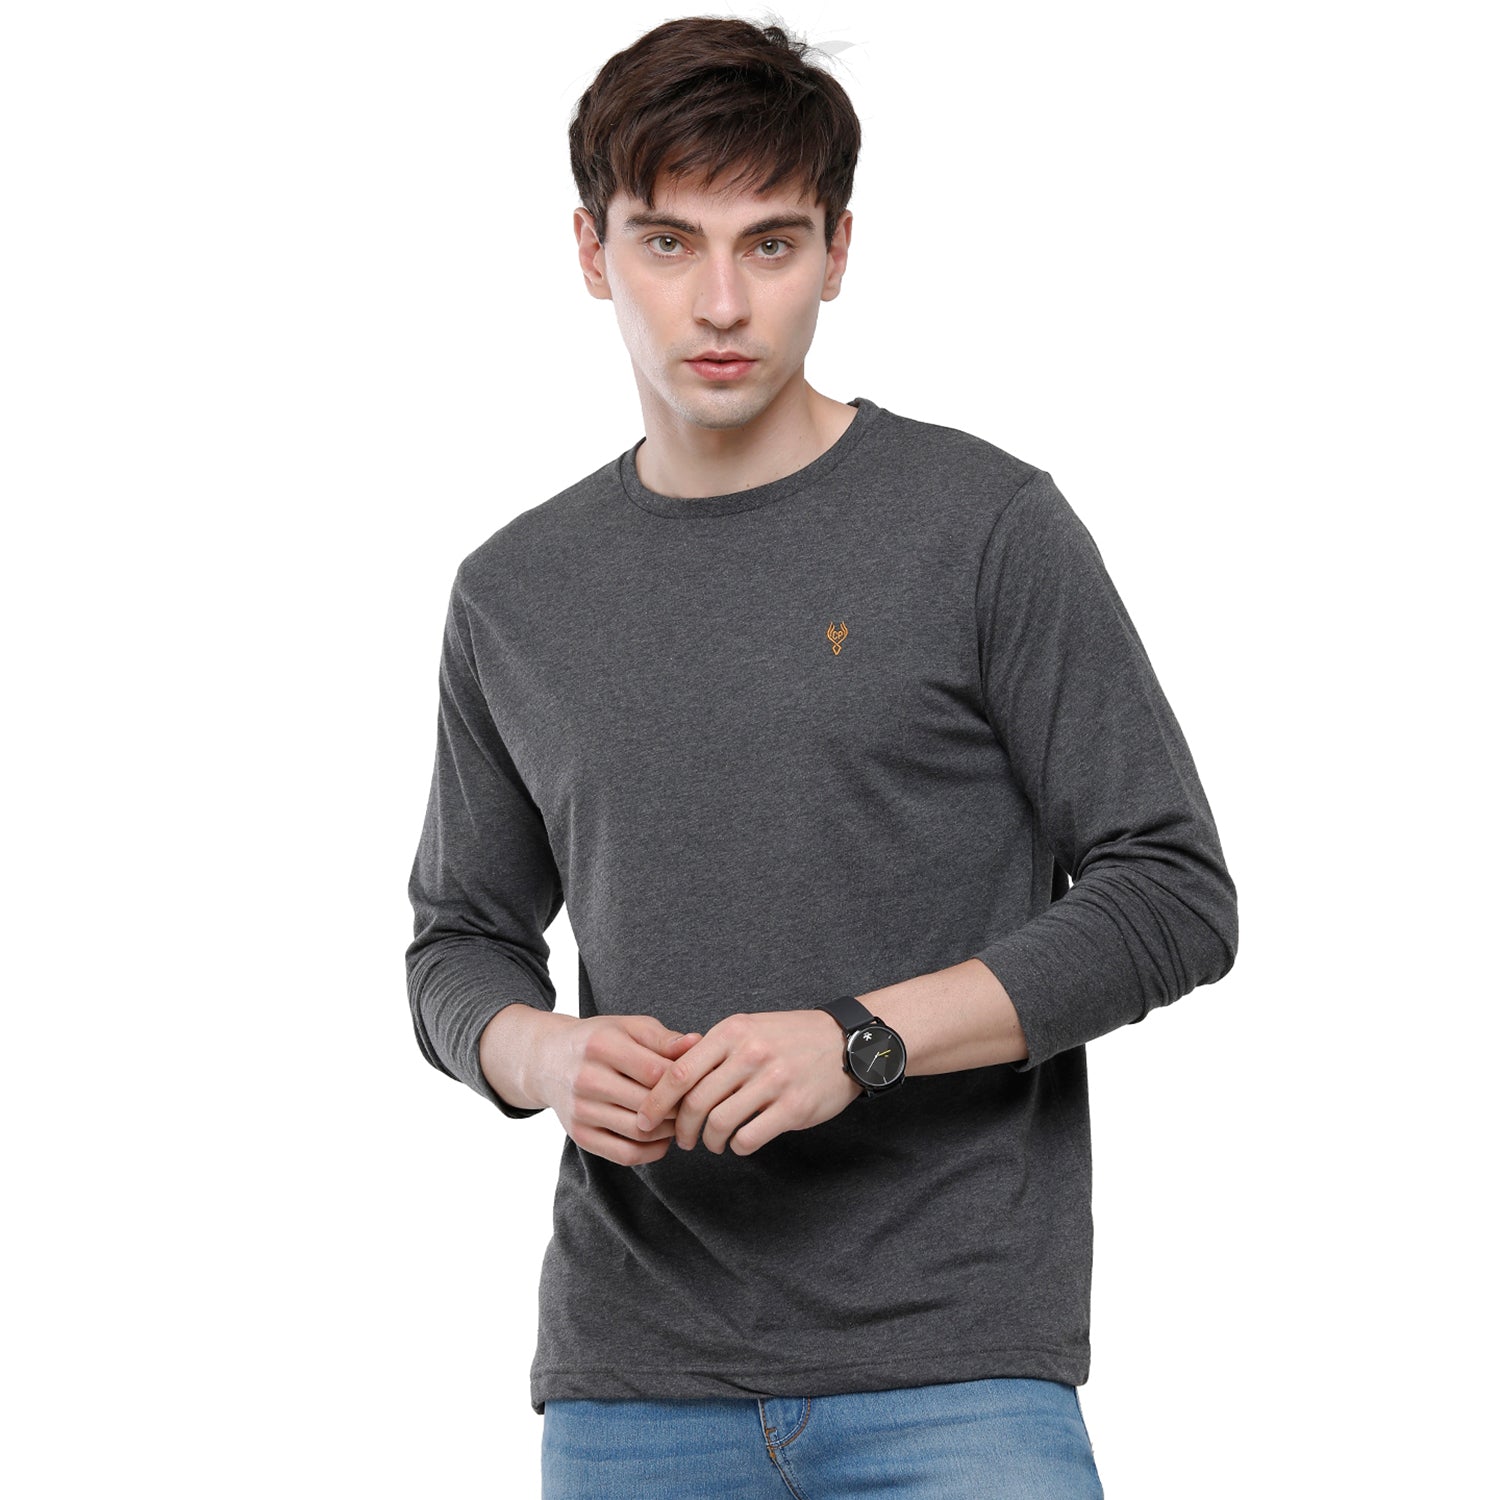 Classic polo Men's Grey Single Jersey Crew Neck Full Sleeve Slim Fit T-Shirt - Comet 03 T-shirt Classic Polo 